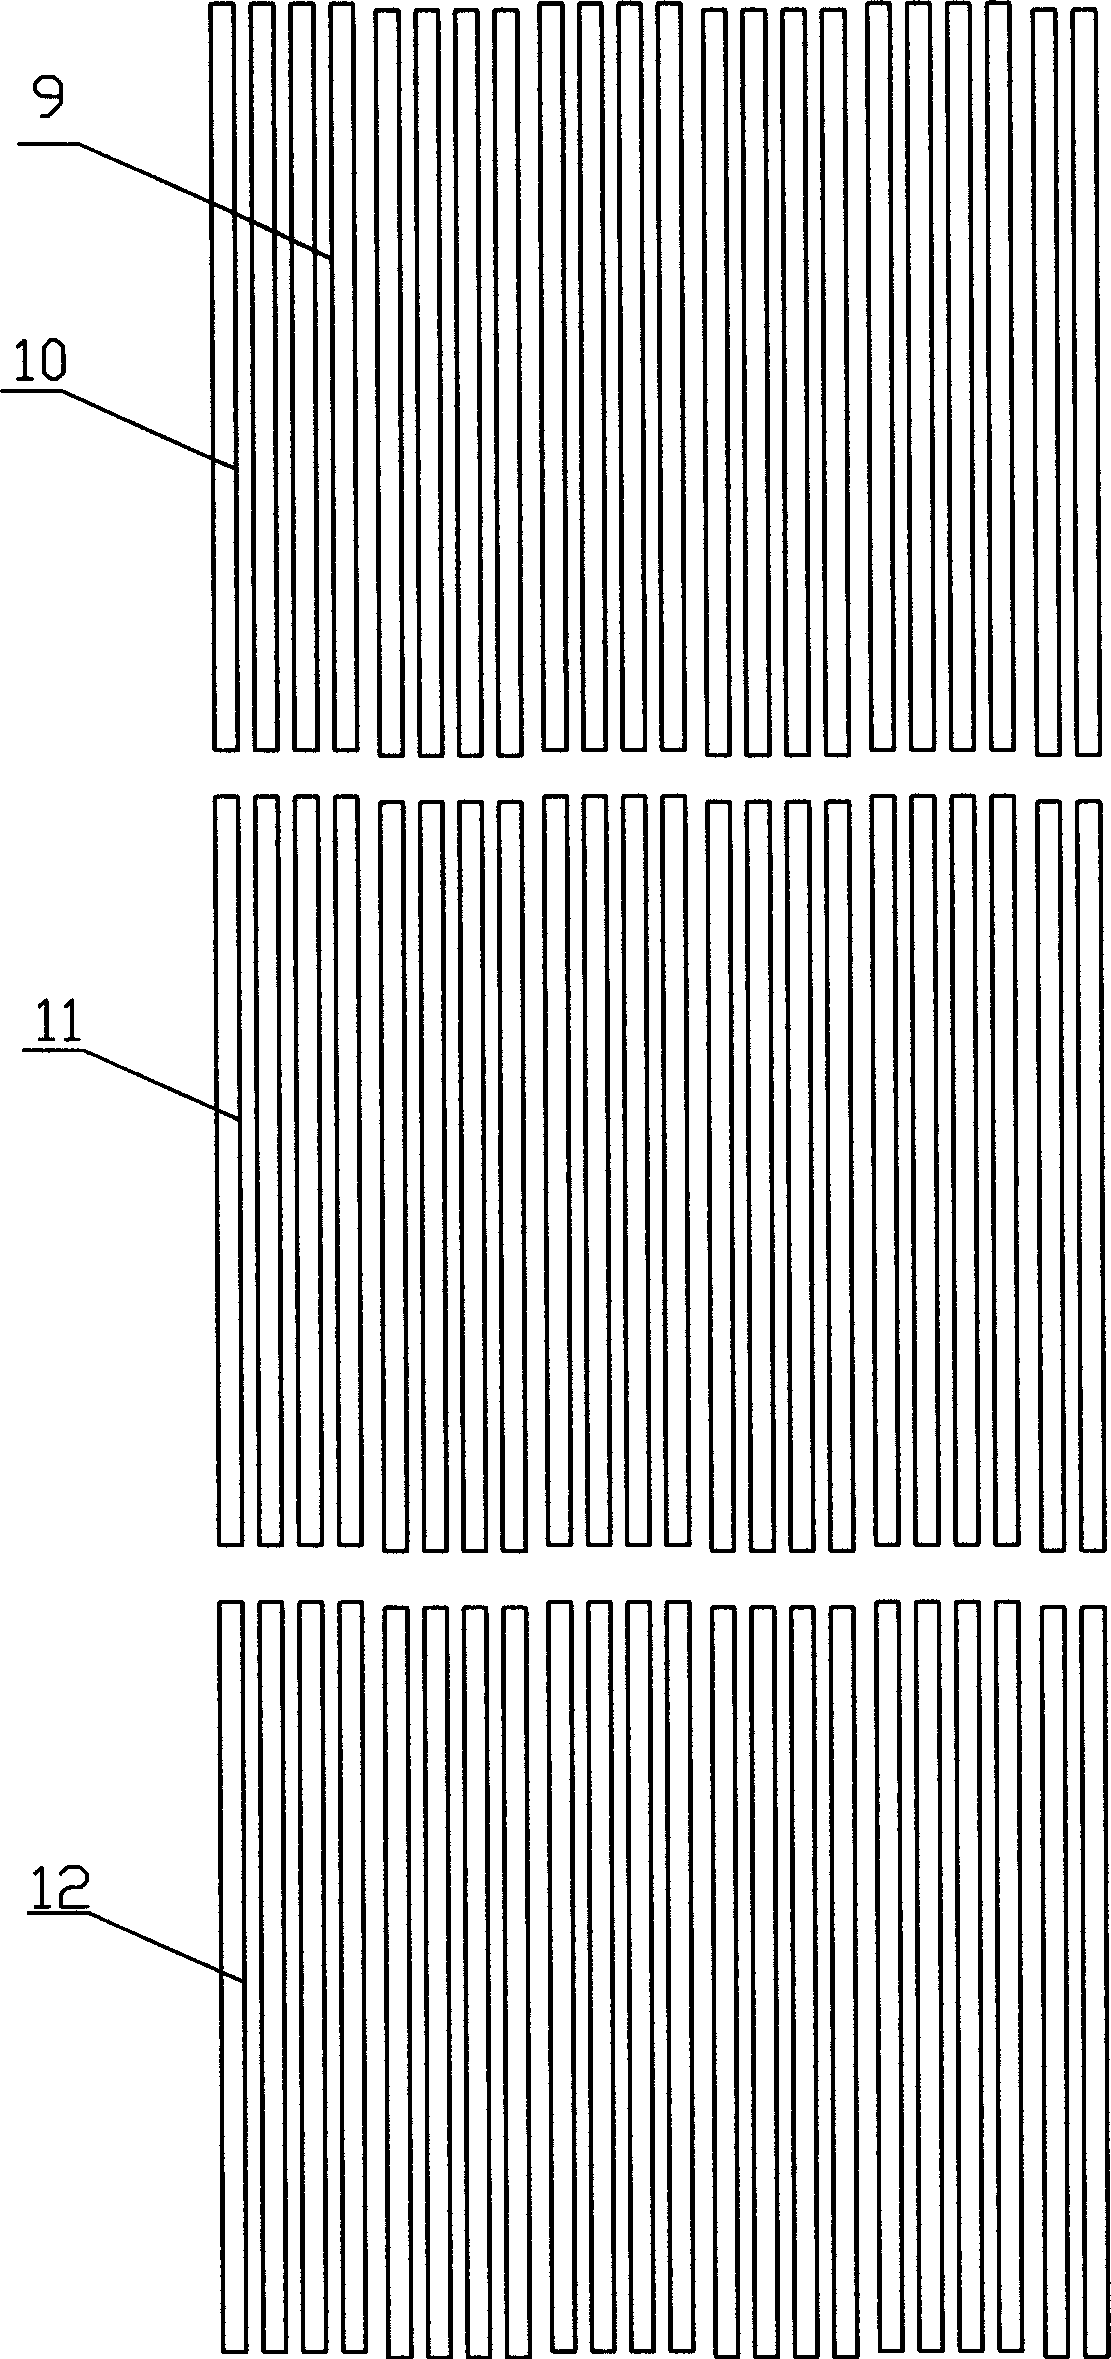 Method for fabricuting single piece of fire-resisting glass